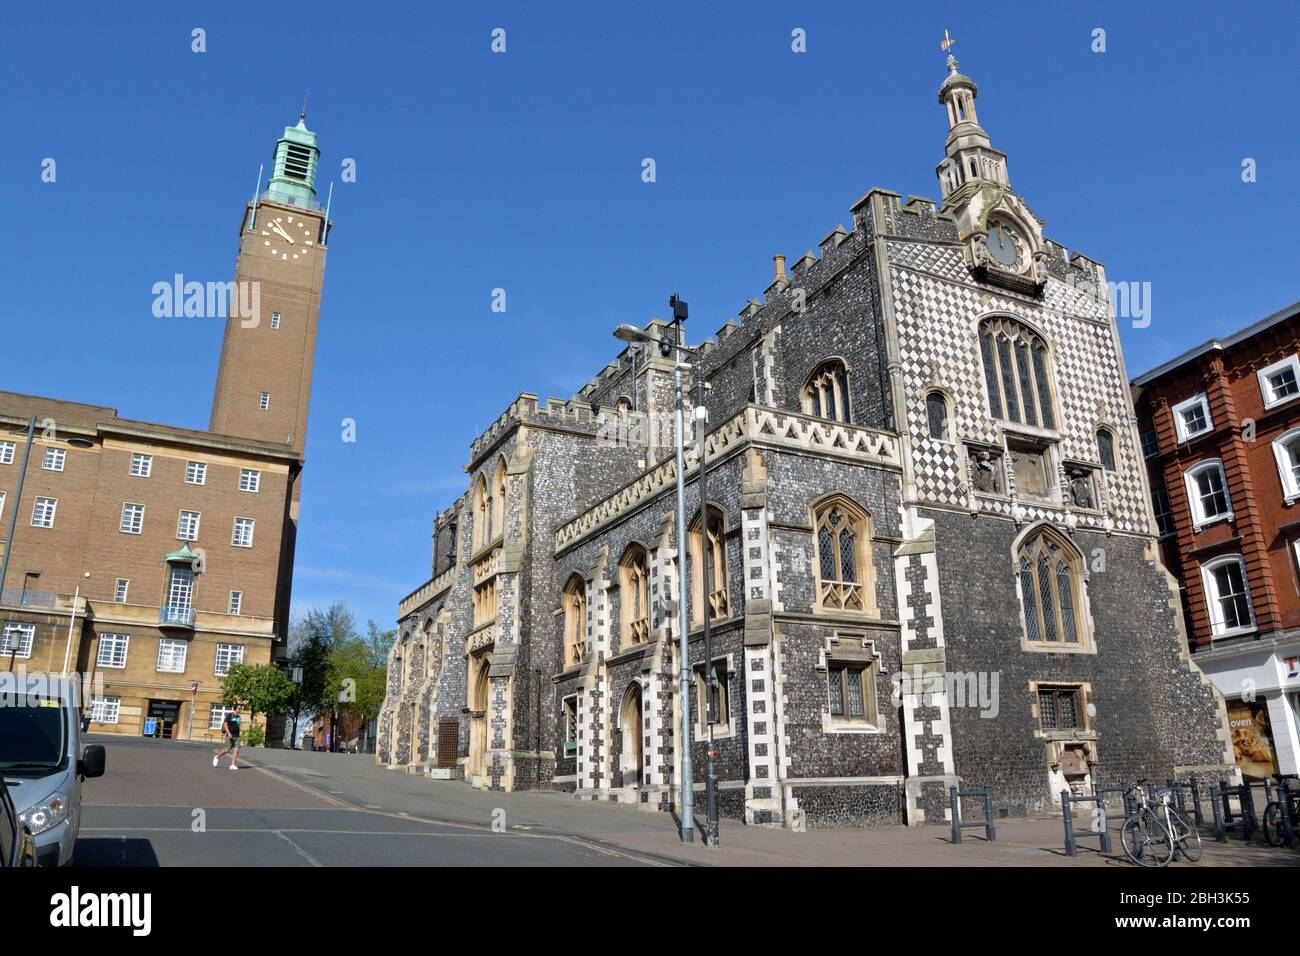 Norwich Guildhall, Norfolk, UK, with the clock tower of City Hall beyond Stock Photo